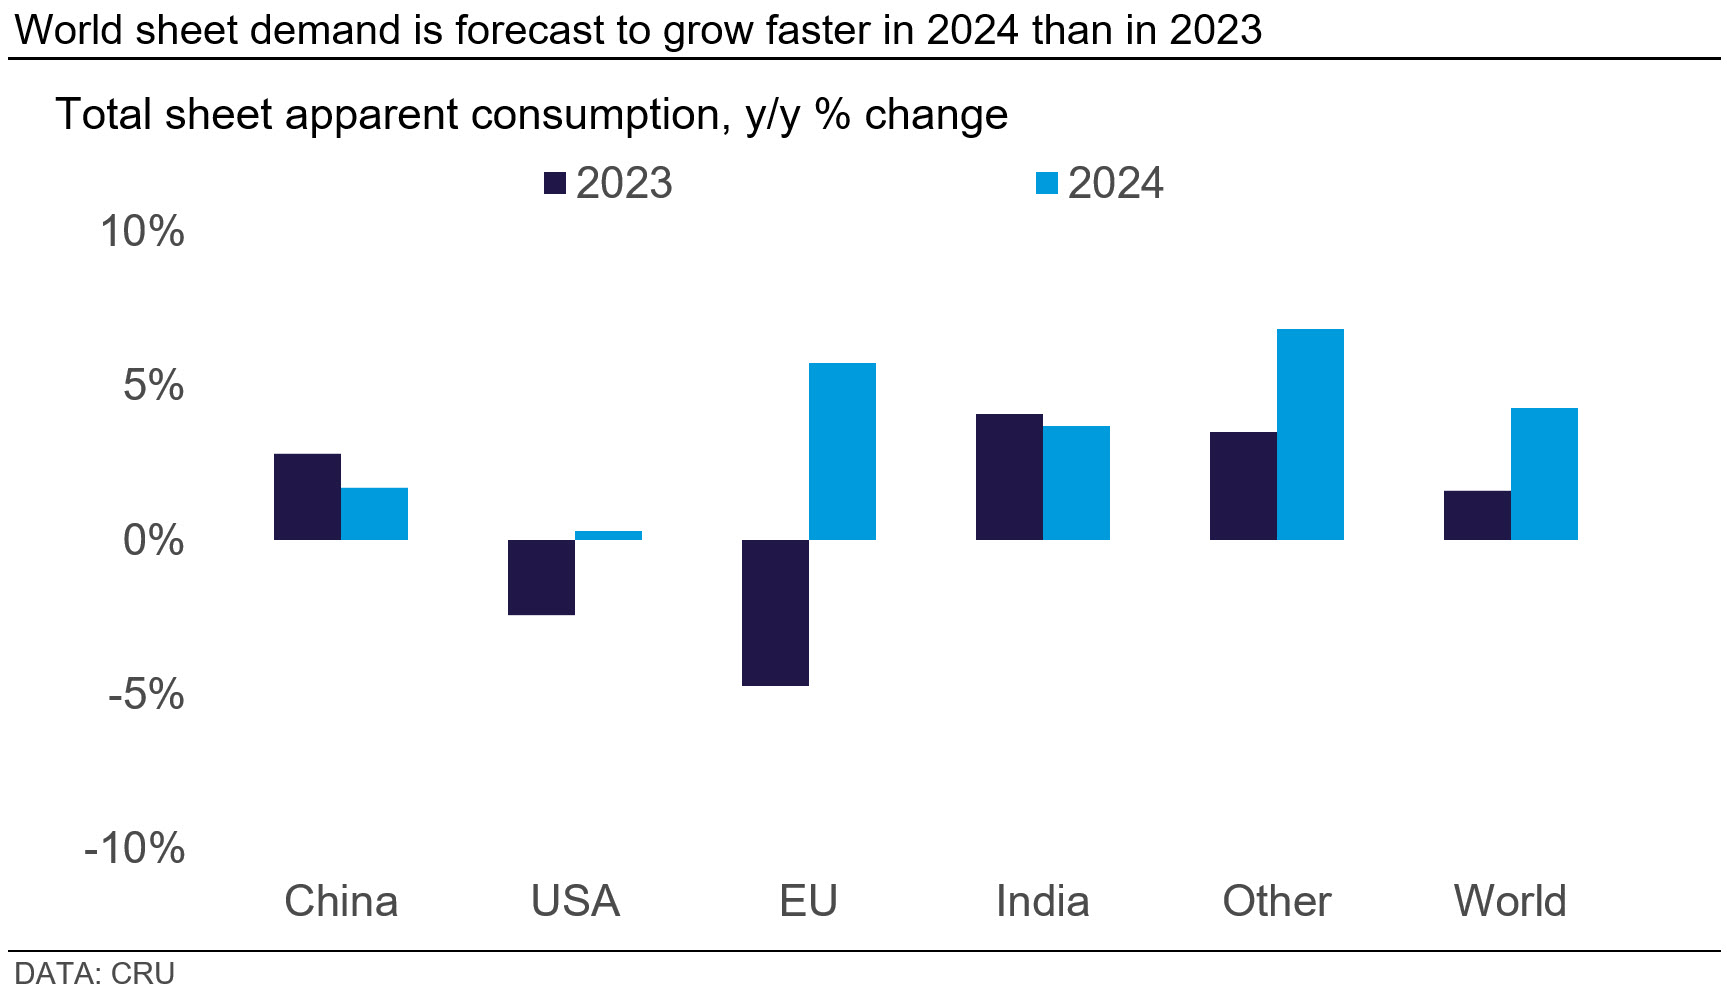 Graph showing that world sheet demand is forecast to grow faster in 2024 than in 2023